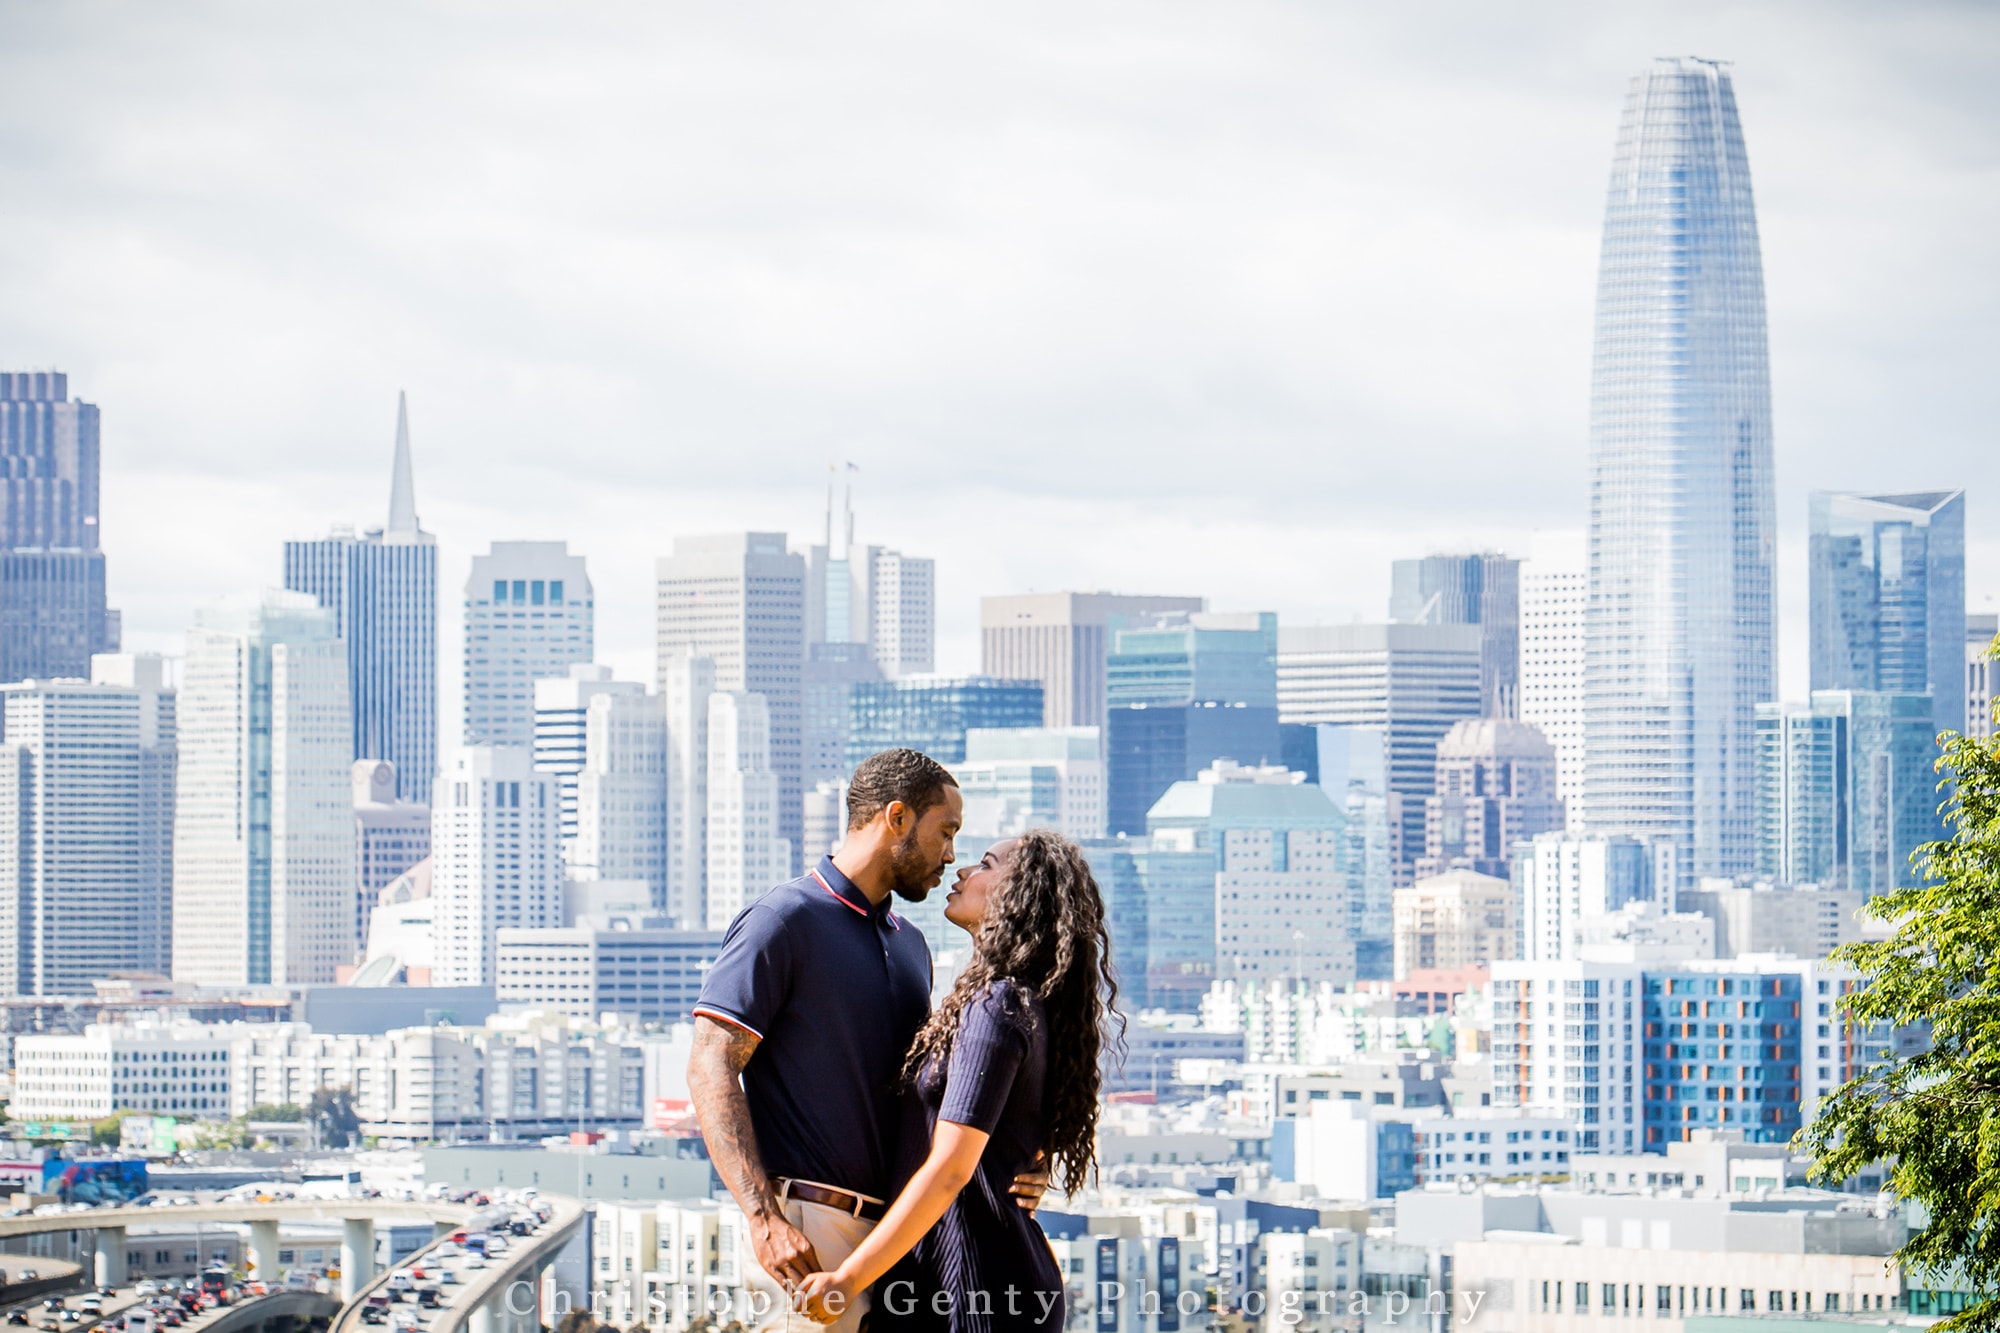 Engagement photography in San Francisco Bay Area, CA